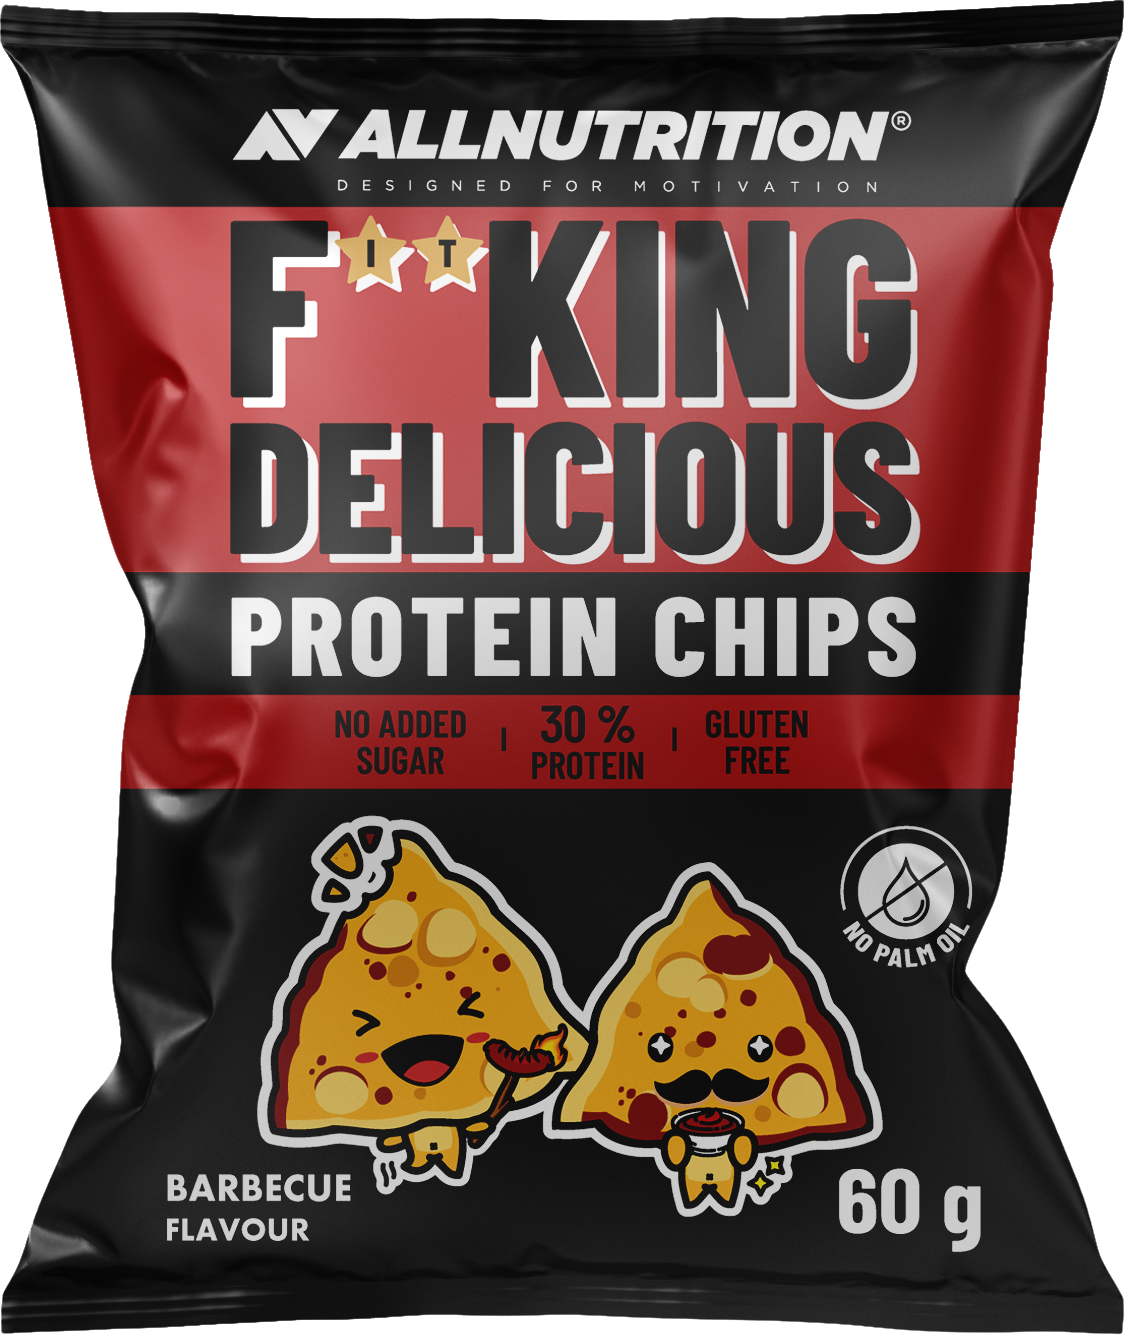 F**King Delicious Protein Chips - 31% Protein - Барбекю